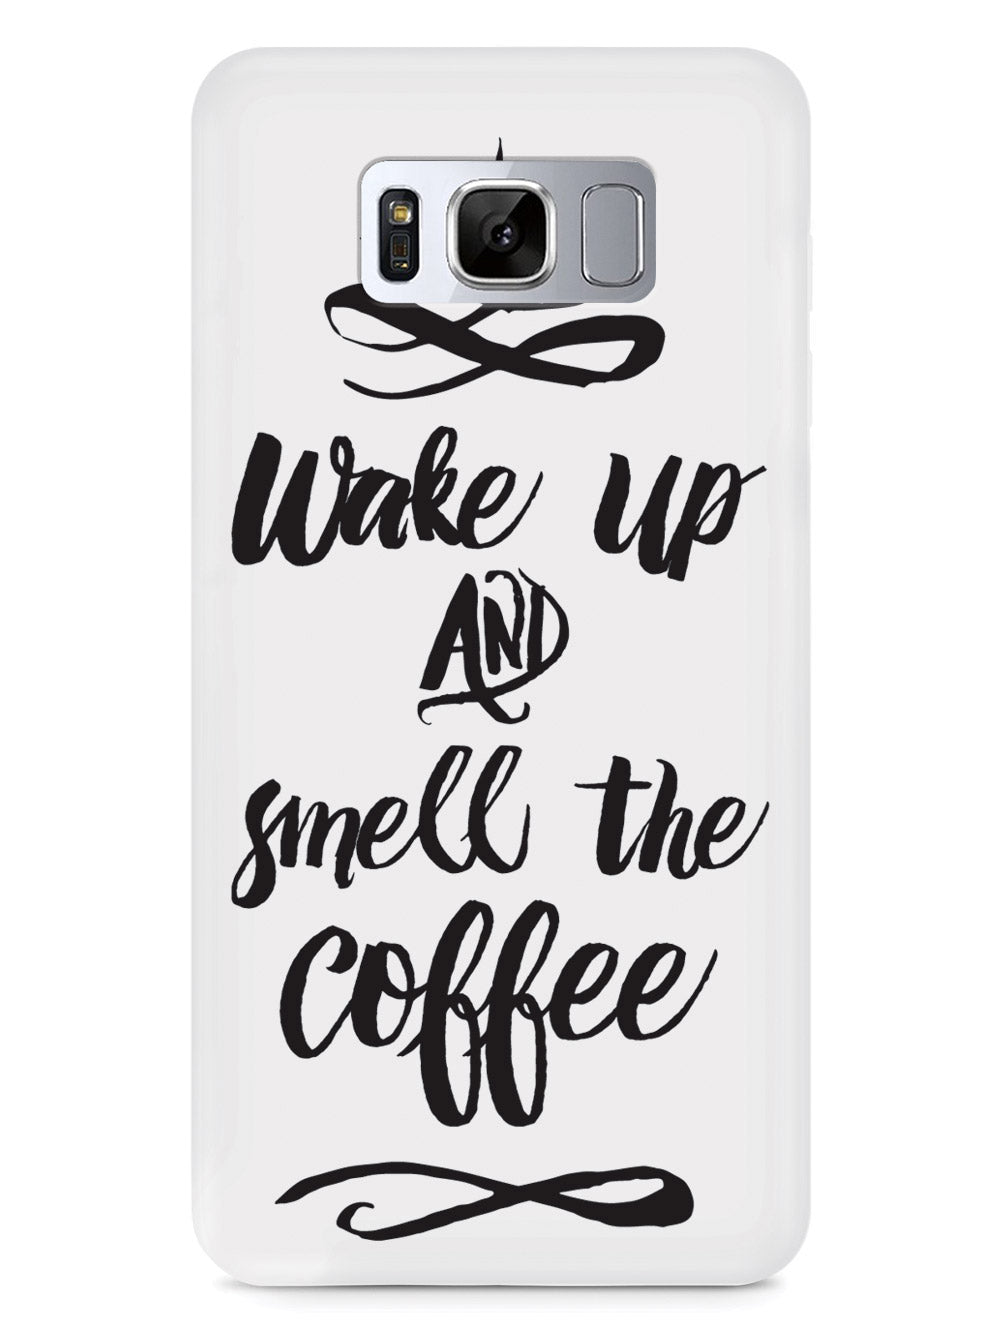 Wake up and Smell the Coffee Case